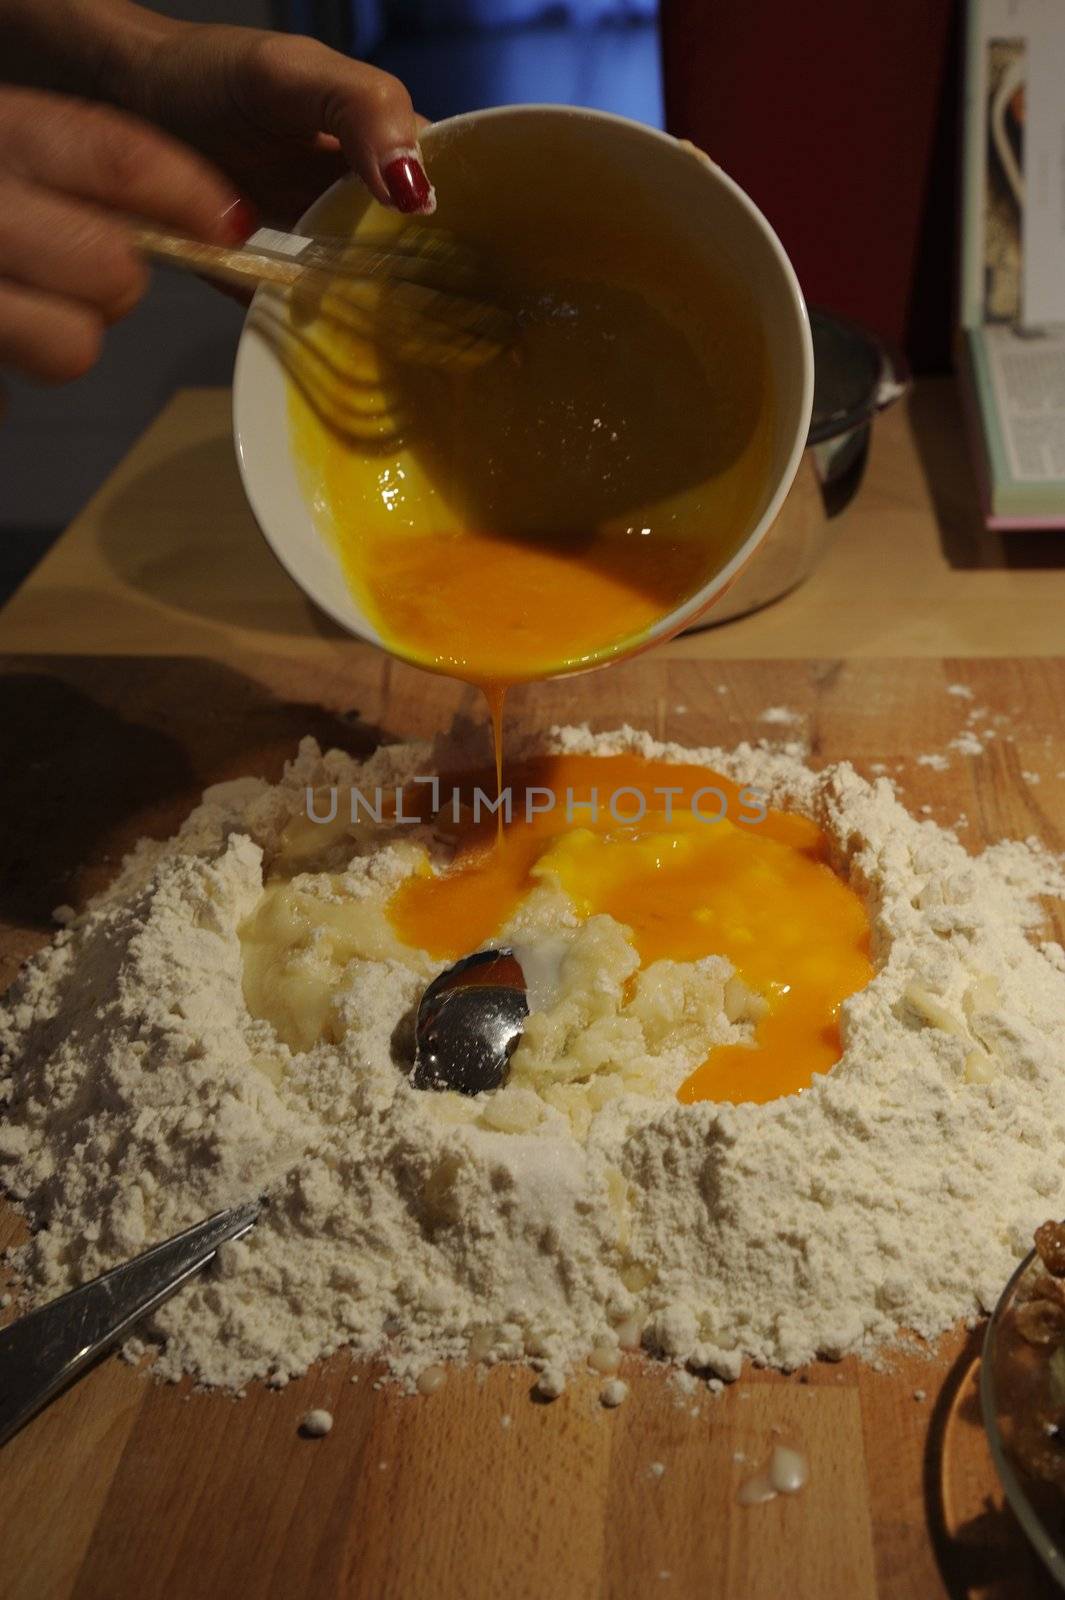 Eggs and wheat: base for making pasta by mizio1970